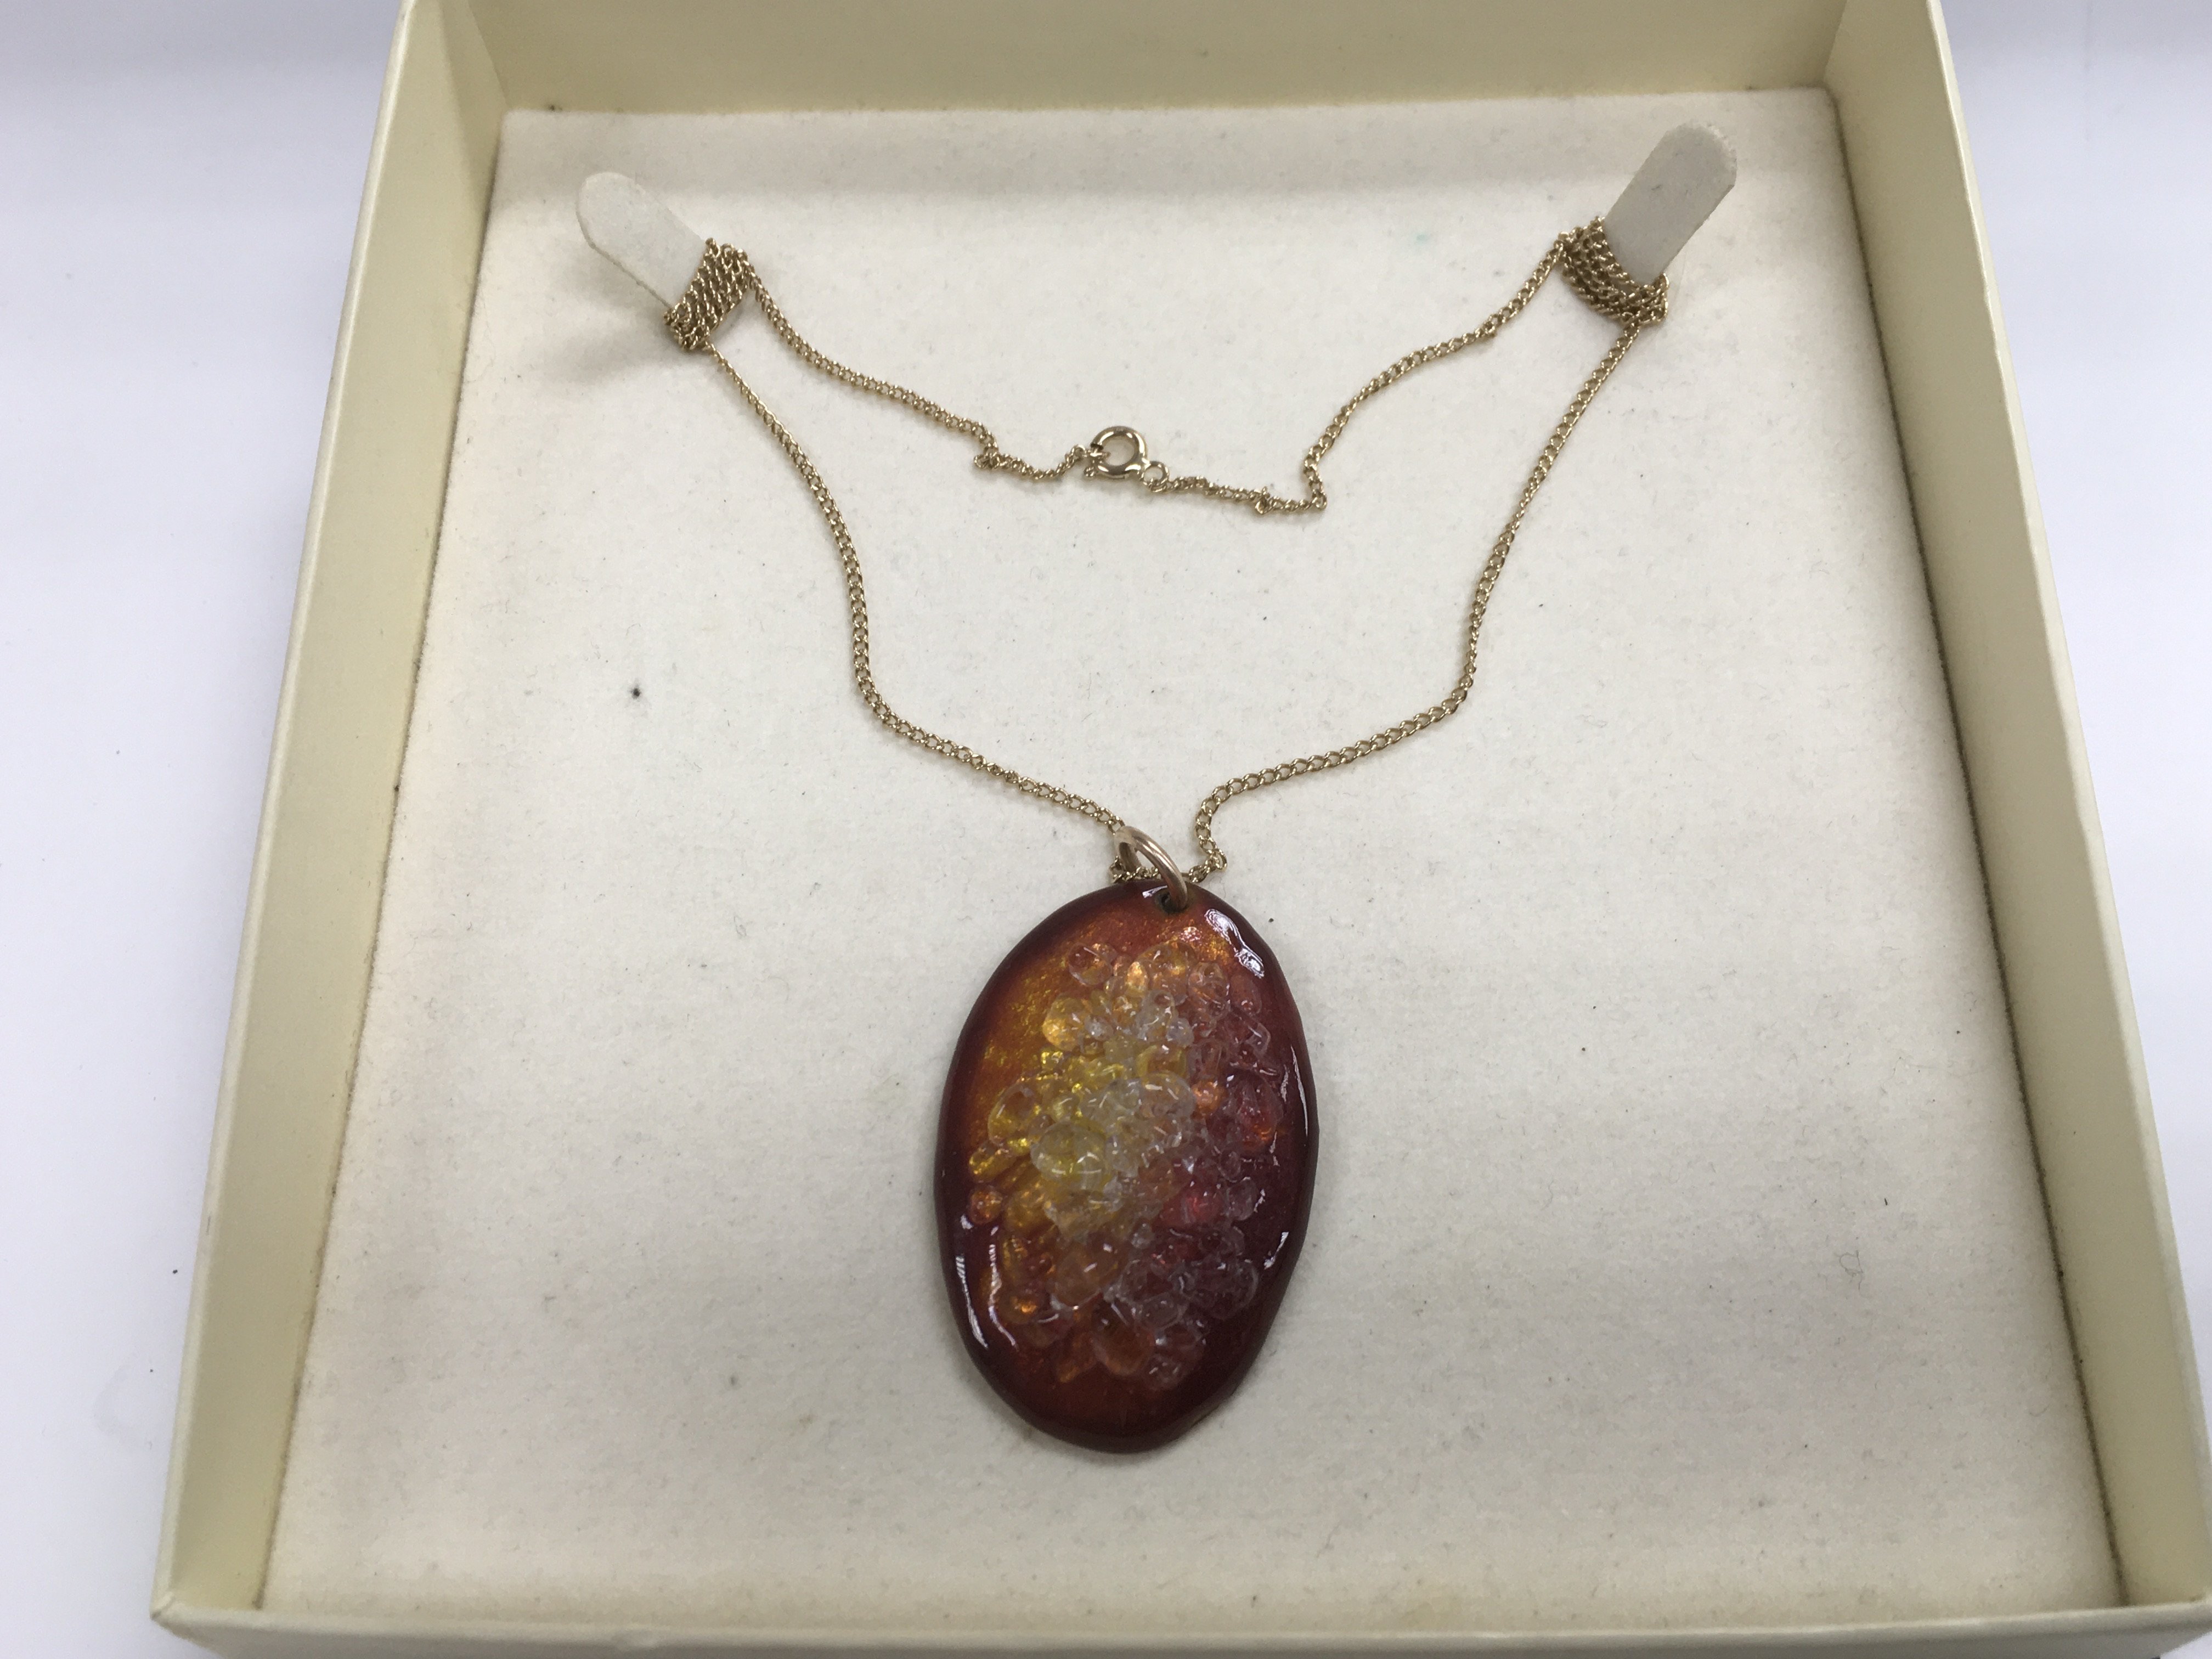 A signed Limoges enamel pendant on a 9ct gold chai